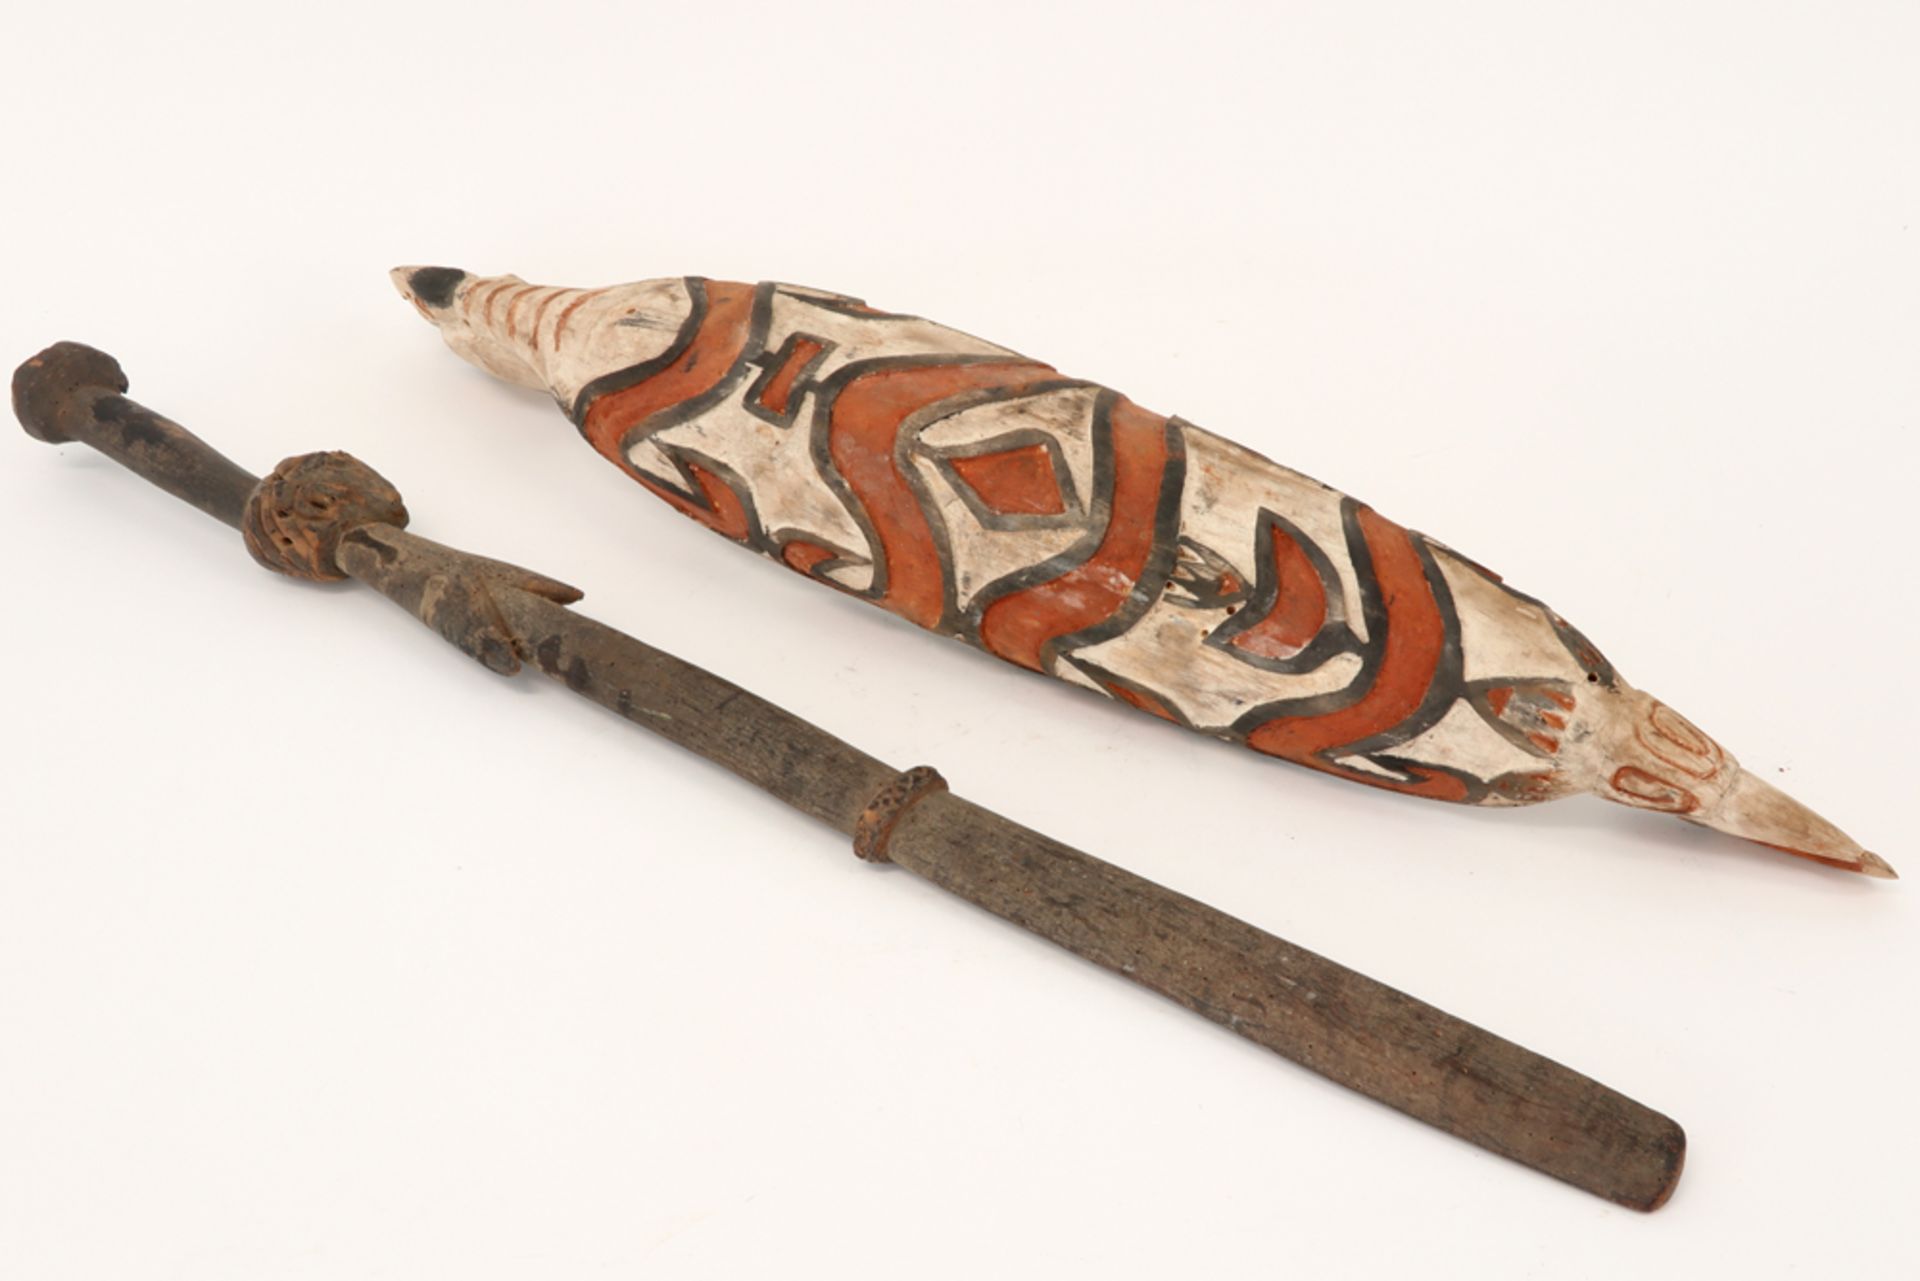 Sago bowl from Irian Jaya and a Papua New Guinean Mid Sepik area digging stick in wood ||Lot (2) van - Image 2 of 3